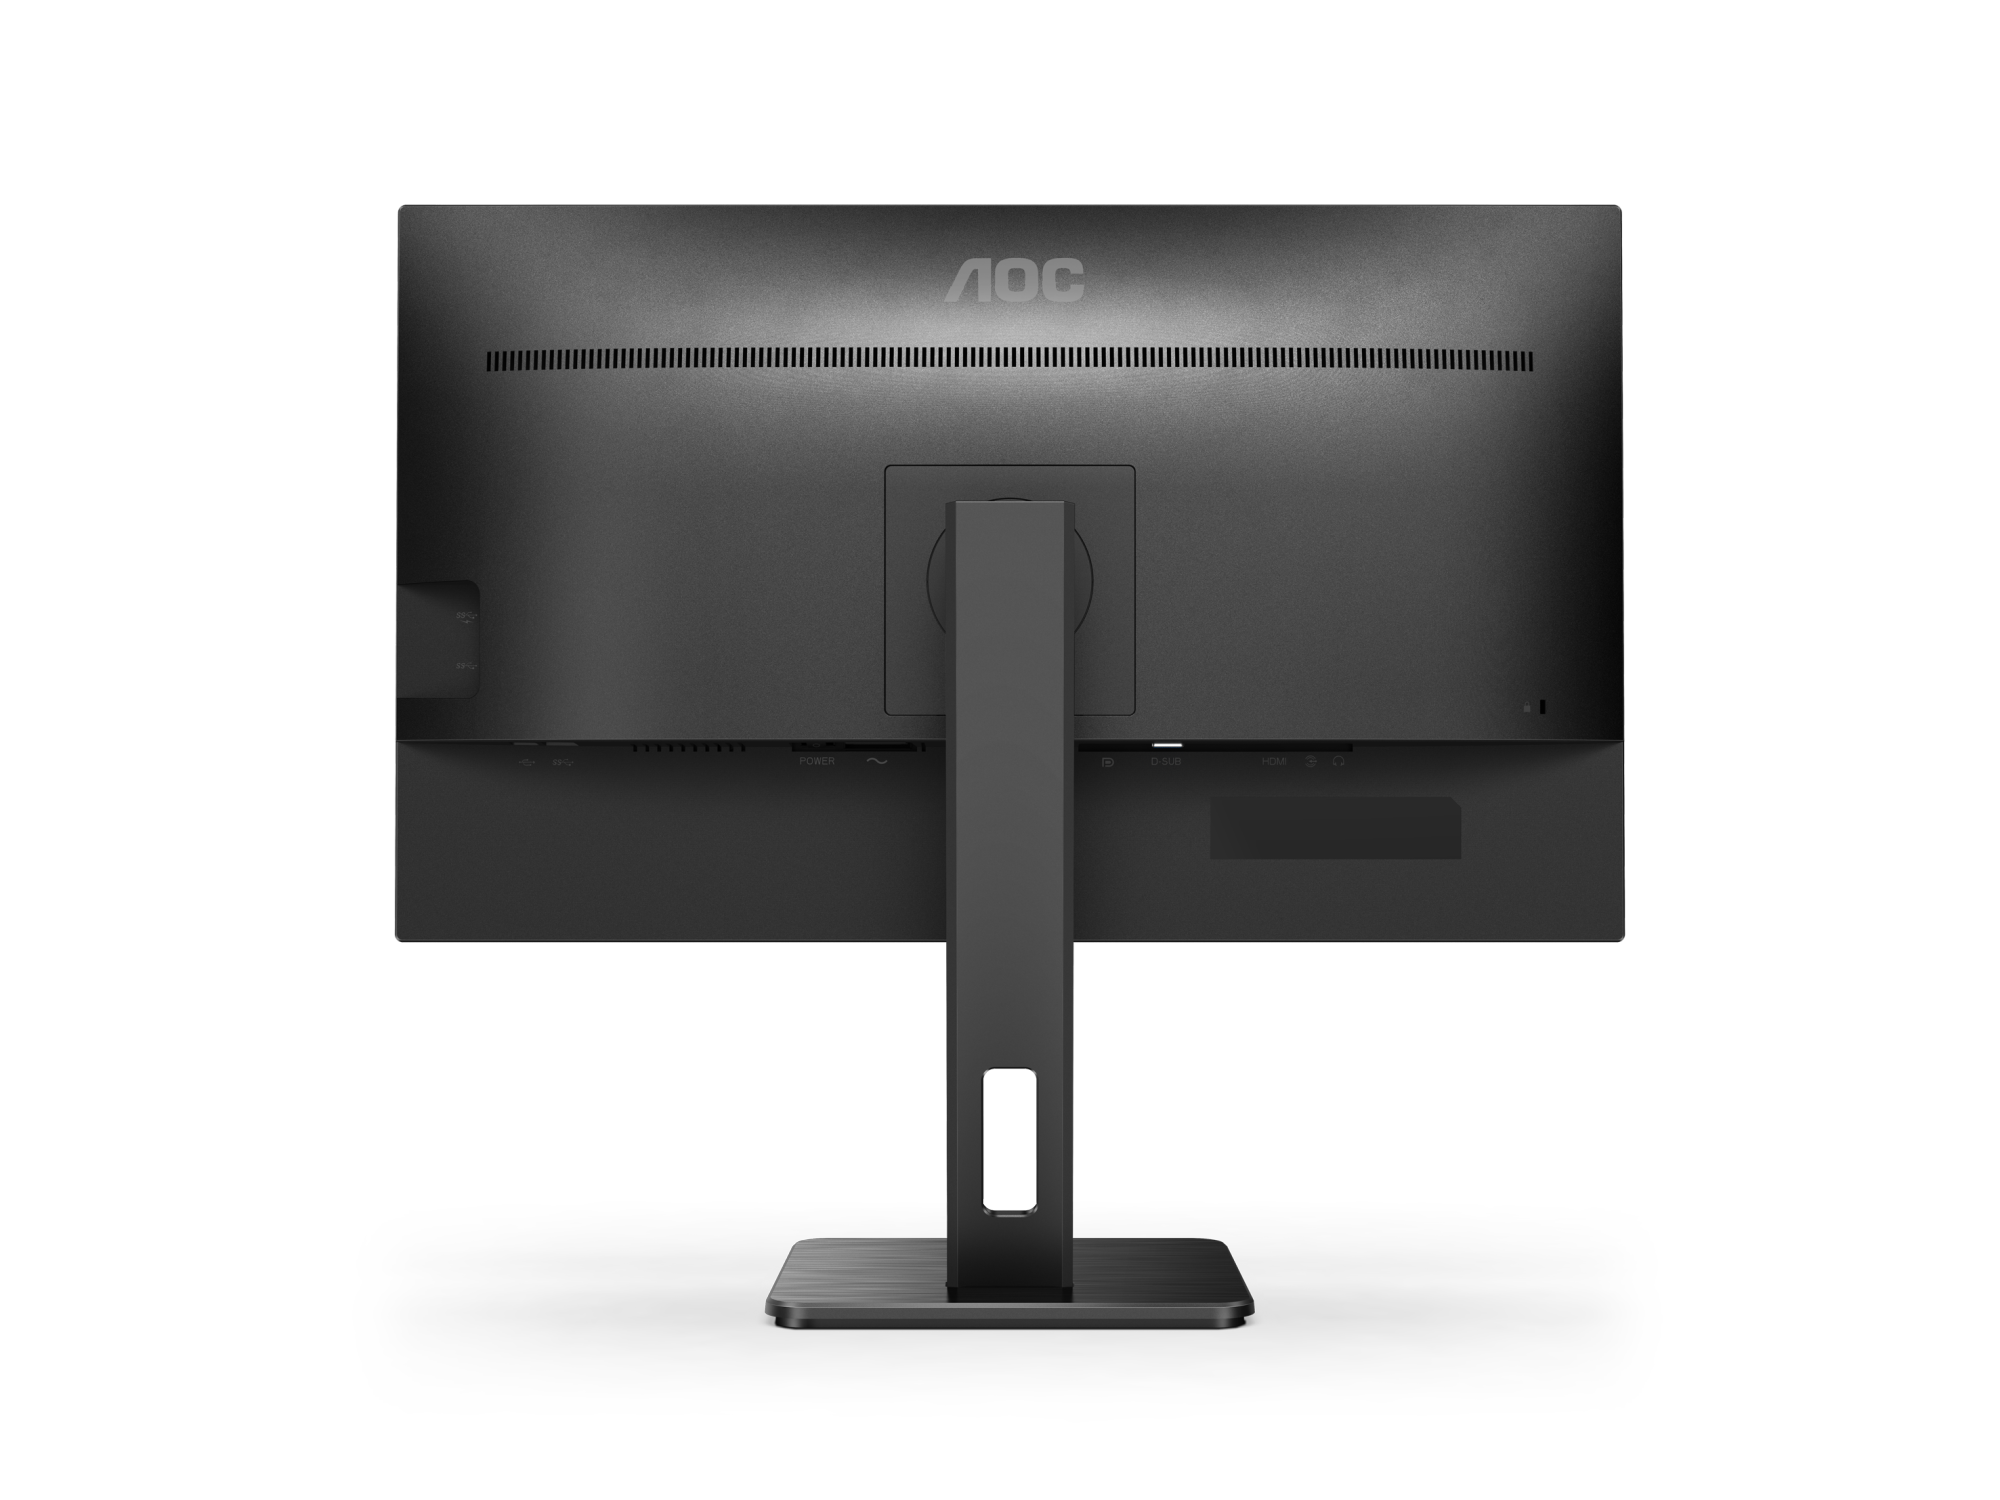   Basics 27” IPS Monitor, Powered with AOC Technology, FHD 1080P, HDMI, Display Port and VGA Input, VESA Compatible, Built-in  Speakers, Black